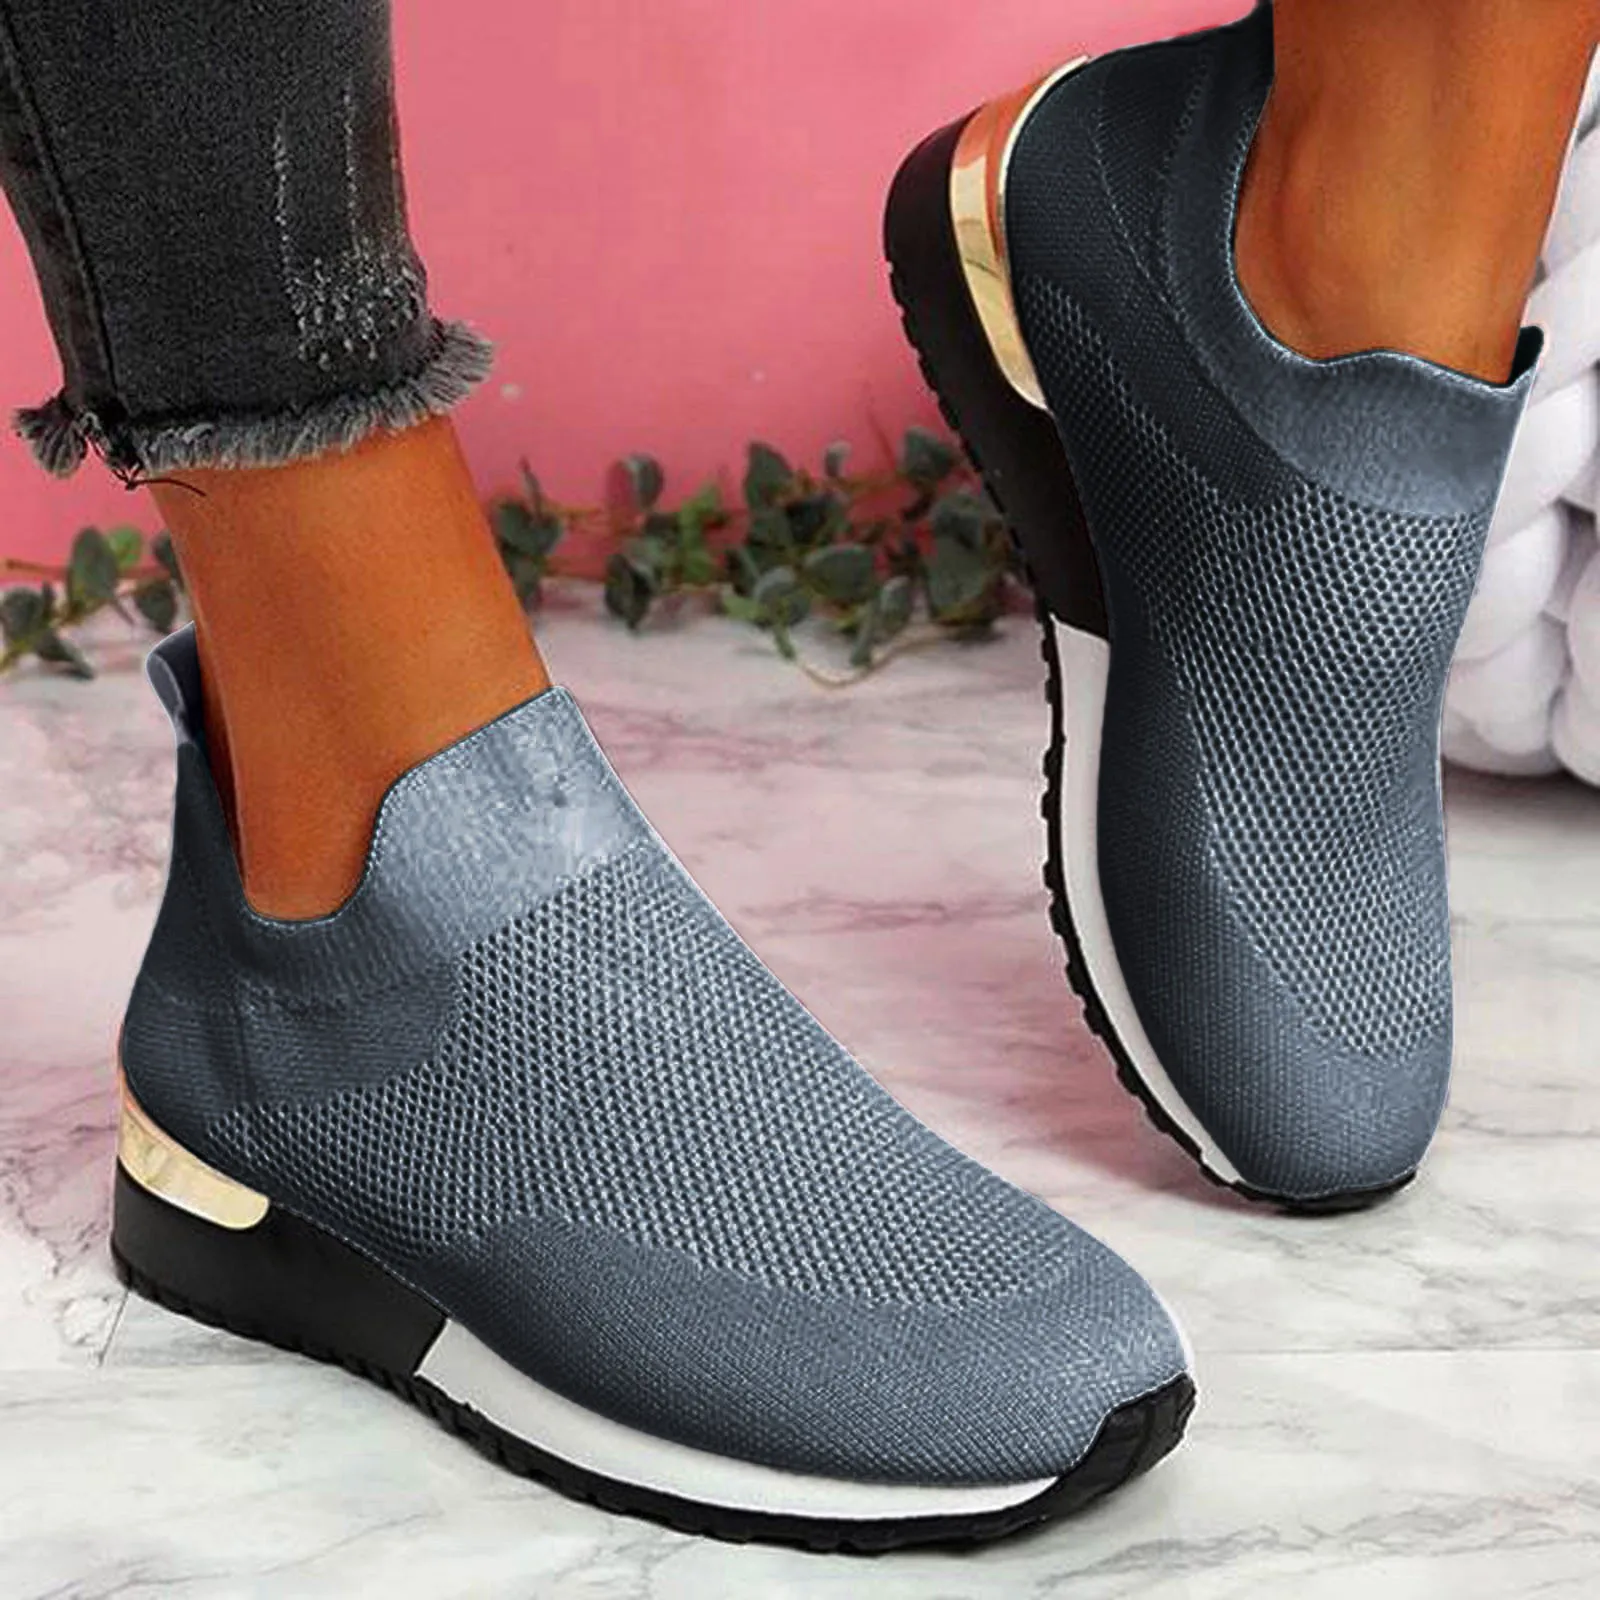 Shoes Women Outdoor  Solid Color  Shoes Runing  Shoes   shoes for women - £114.93 GBP